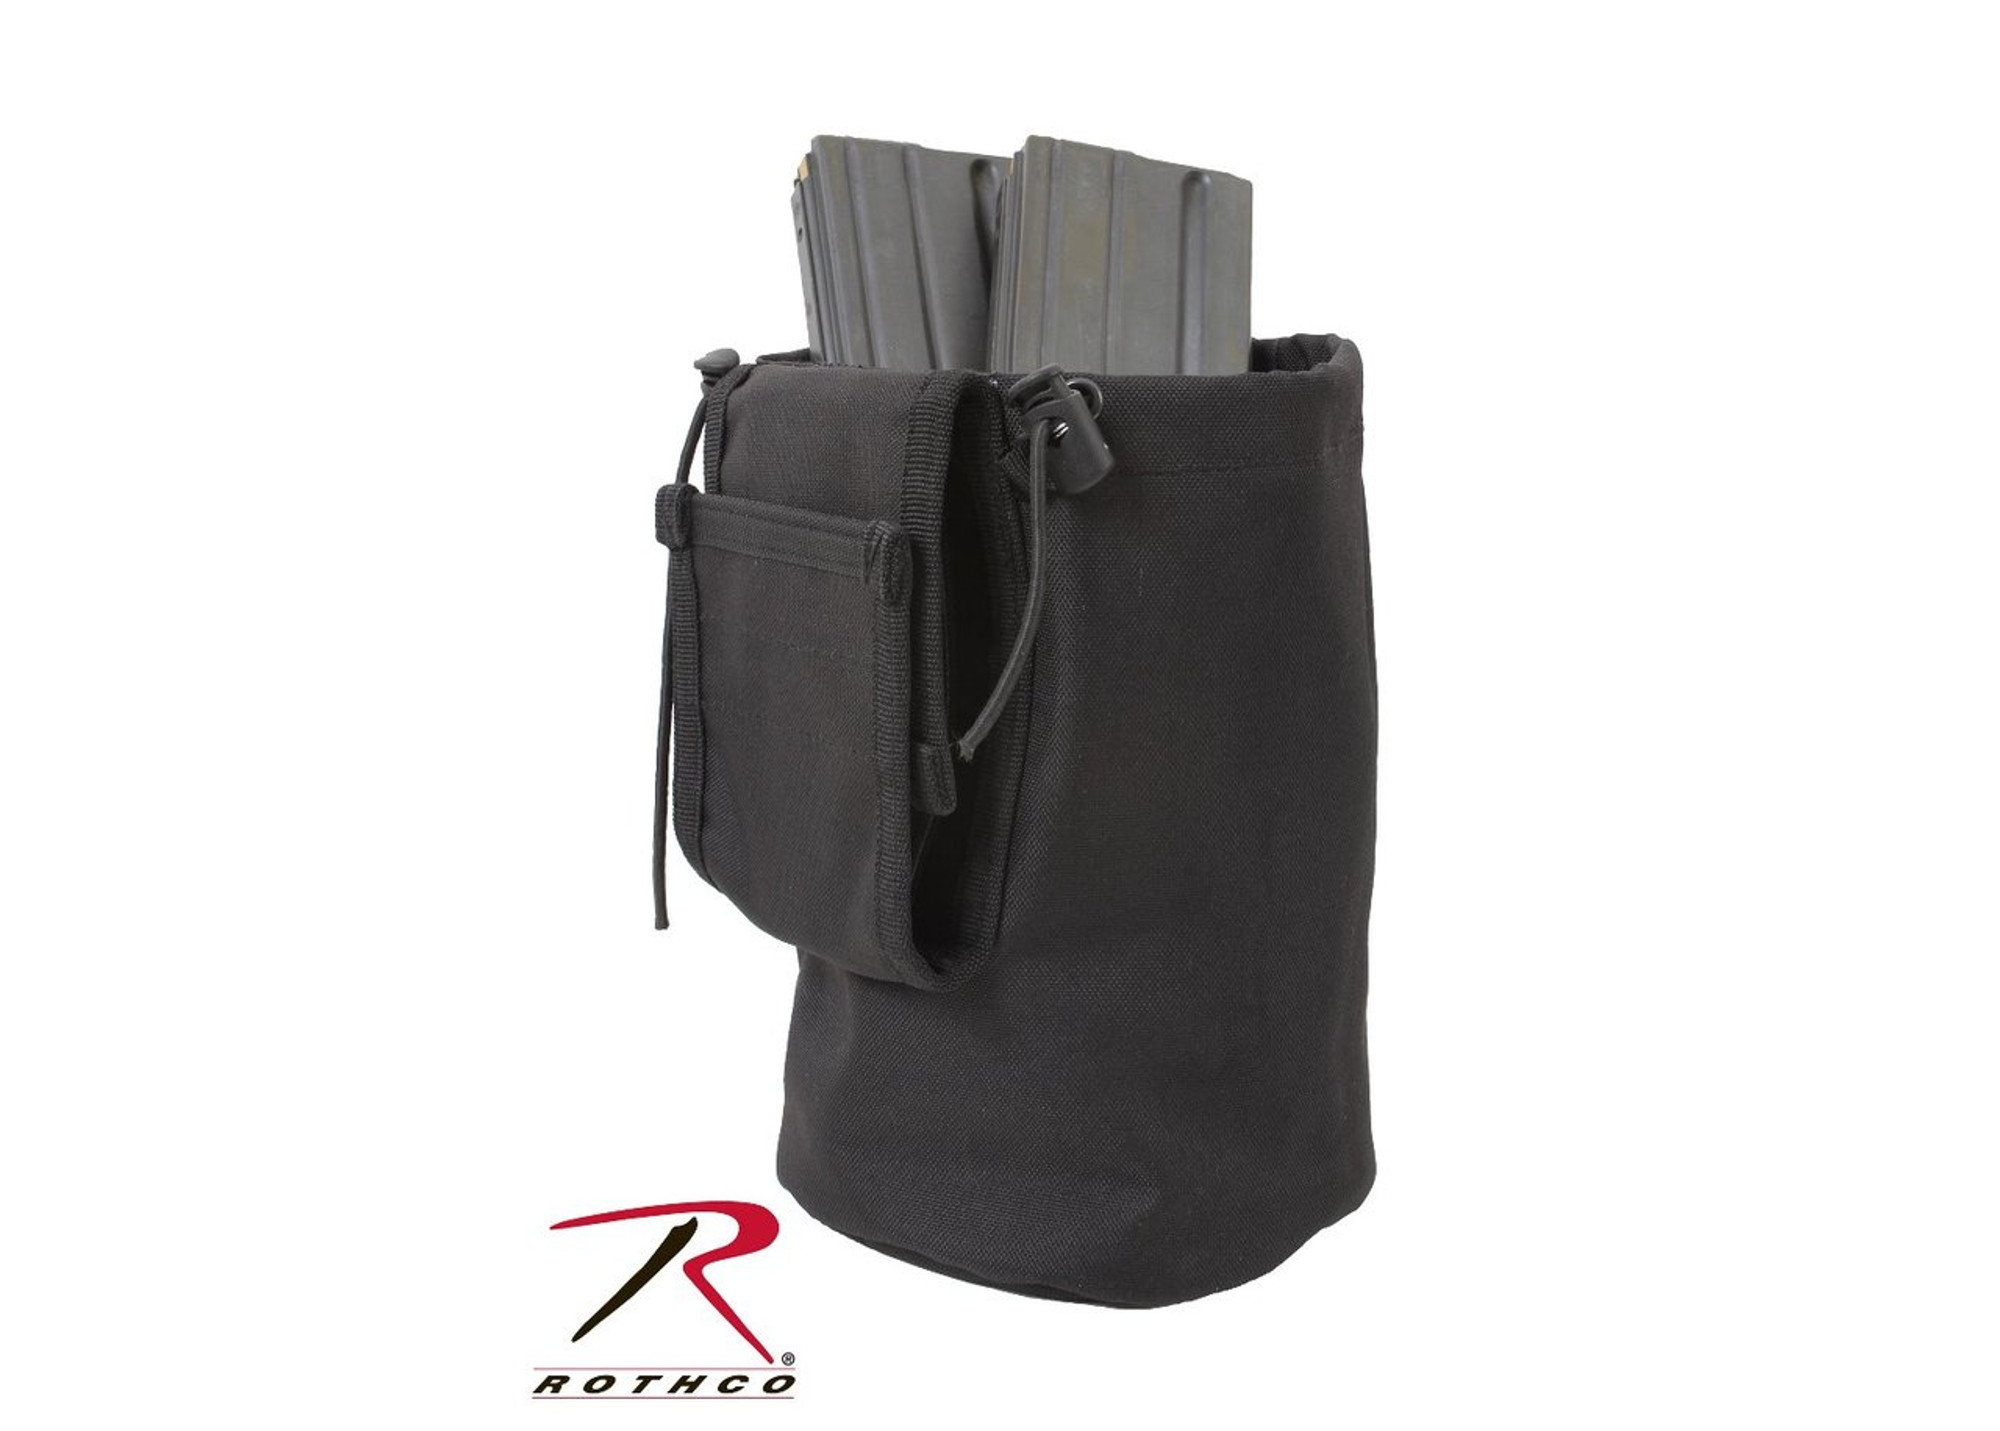 Rothco MOLLE Roll-Up Utility Dump Pouch - Black